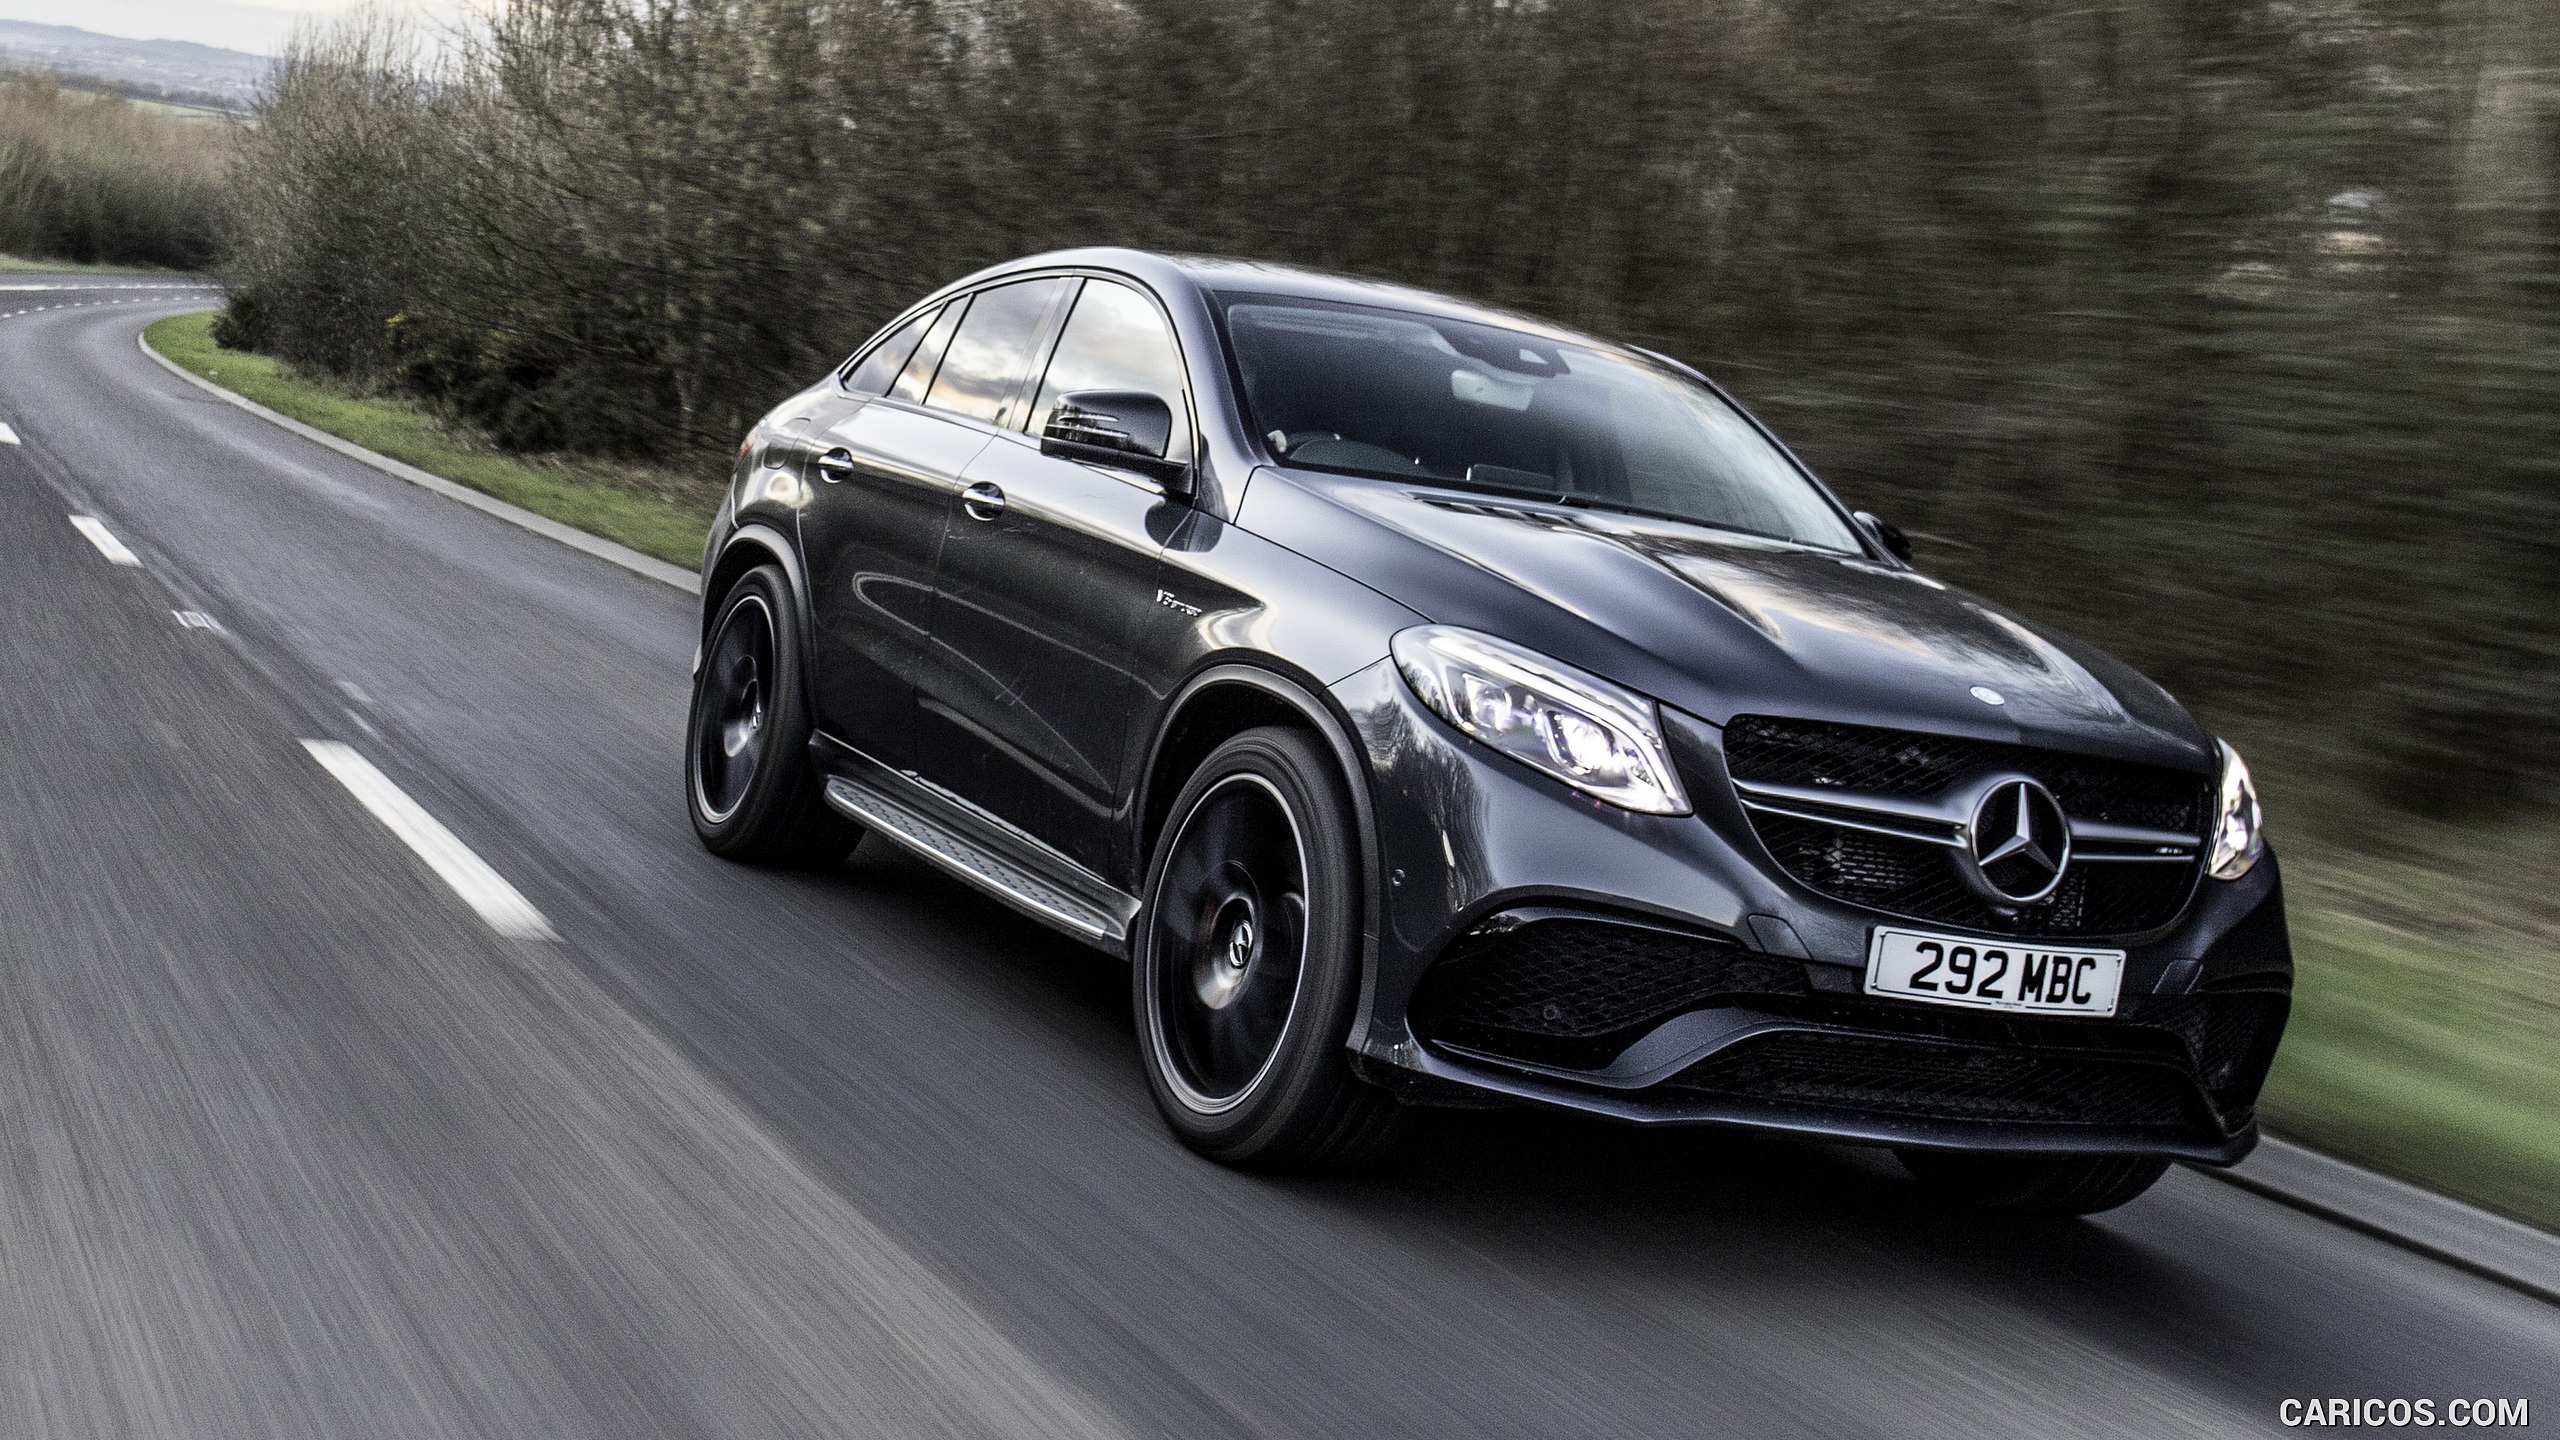 2016 Mercedes-AMG GLE 63 S Coupe (UK-Spec) - Front, #45 of 65